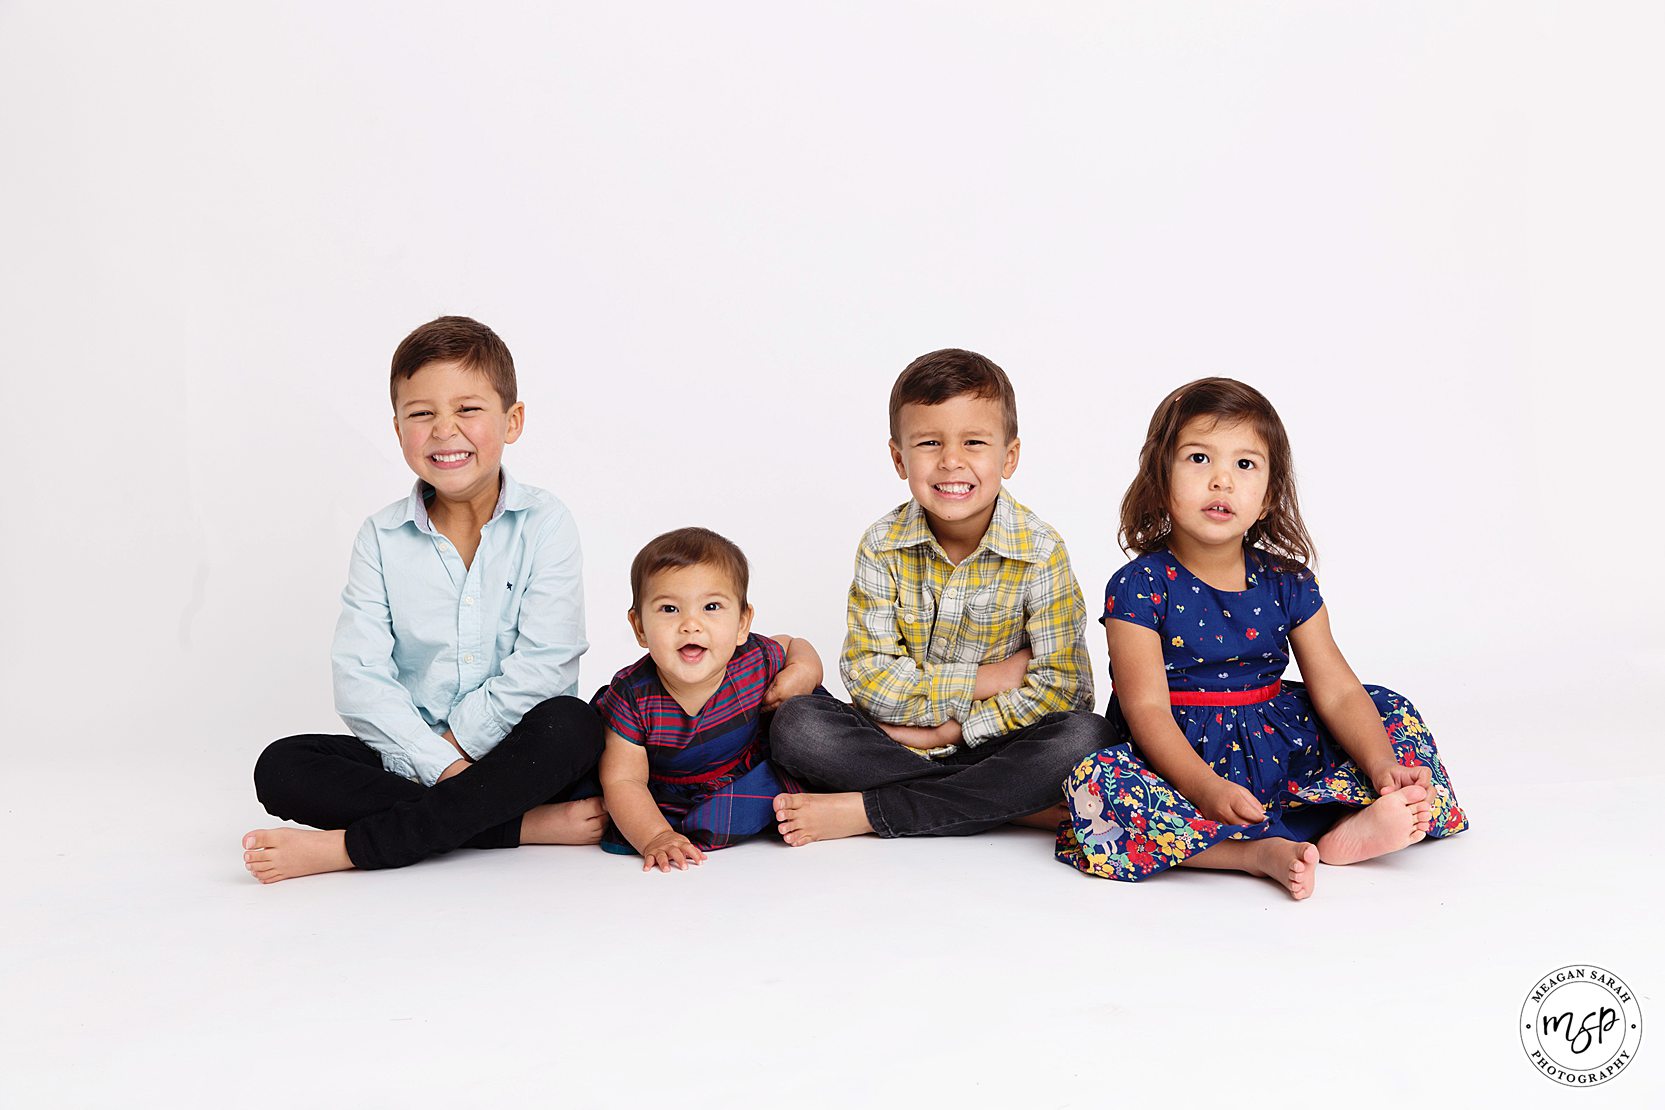 Family,Family Photo shoot,Family pictures,Fun,Leeds,Pictures,Portraits,Siblings,Studio Photographer,Twins,